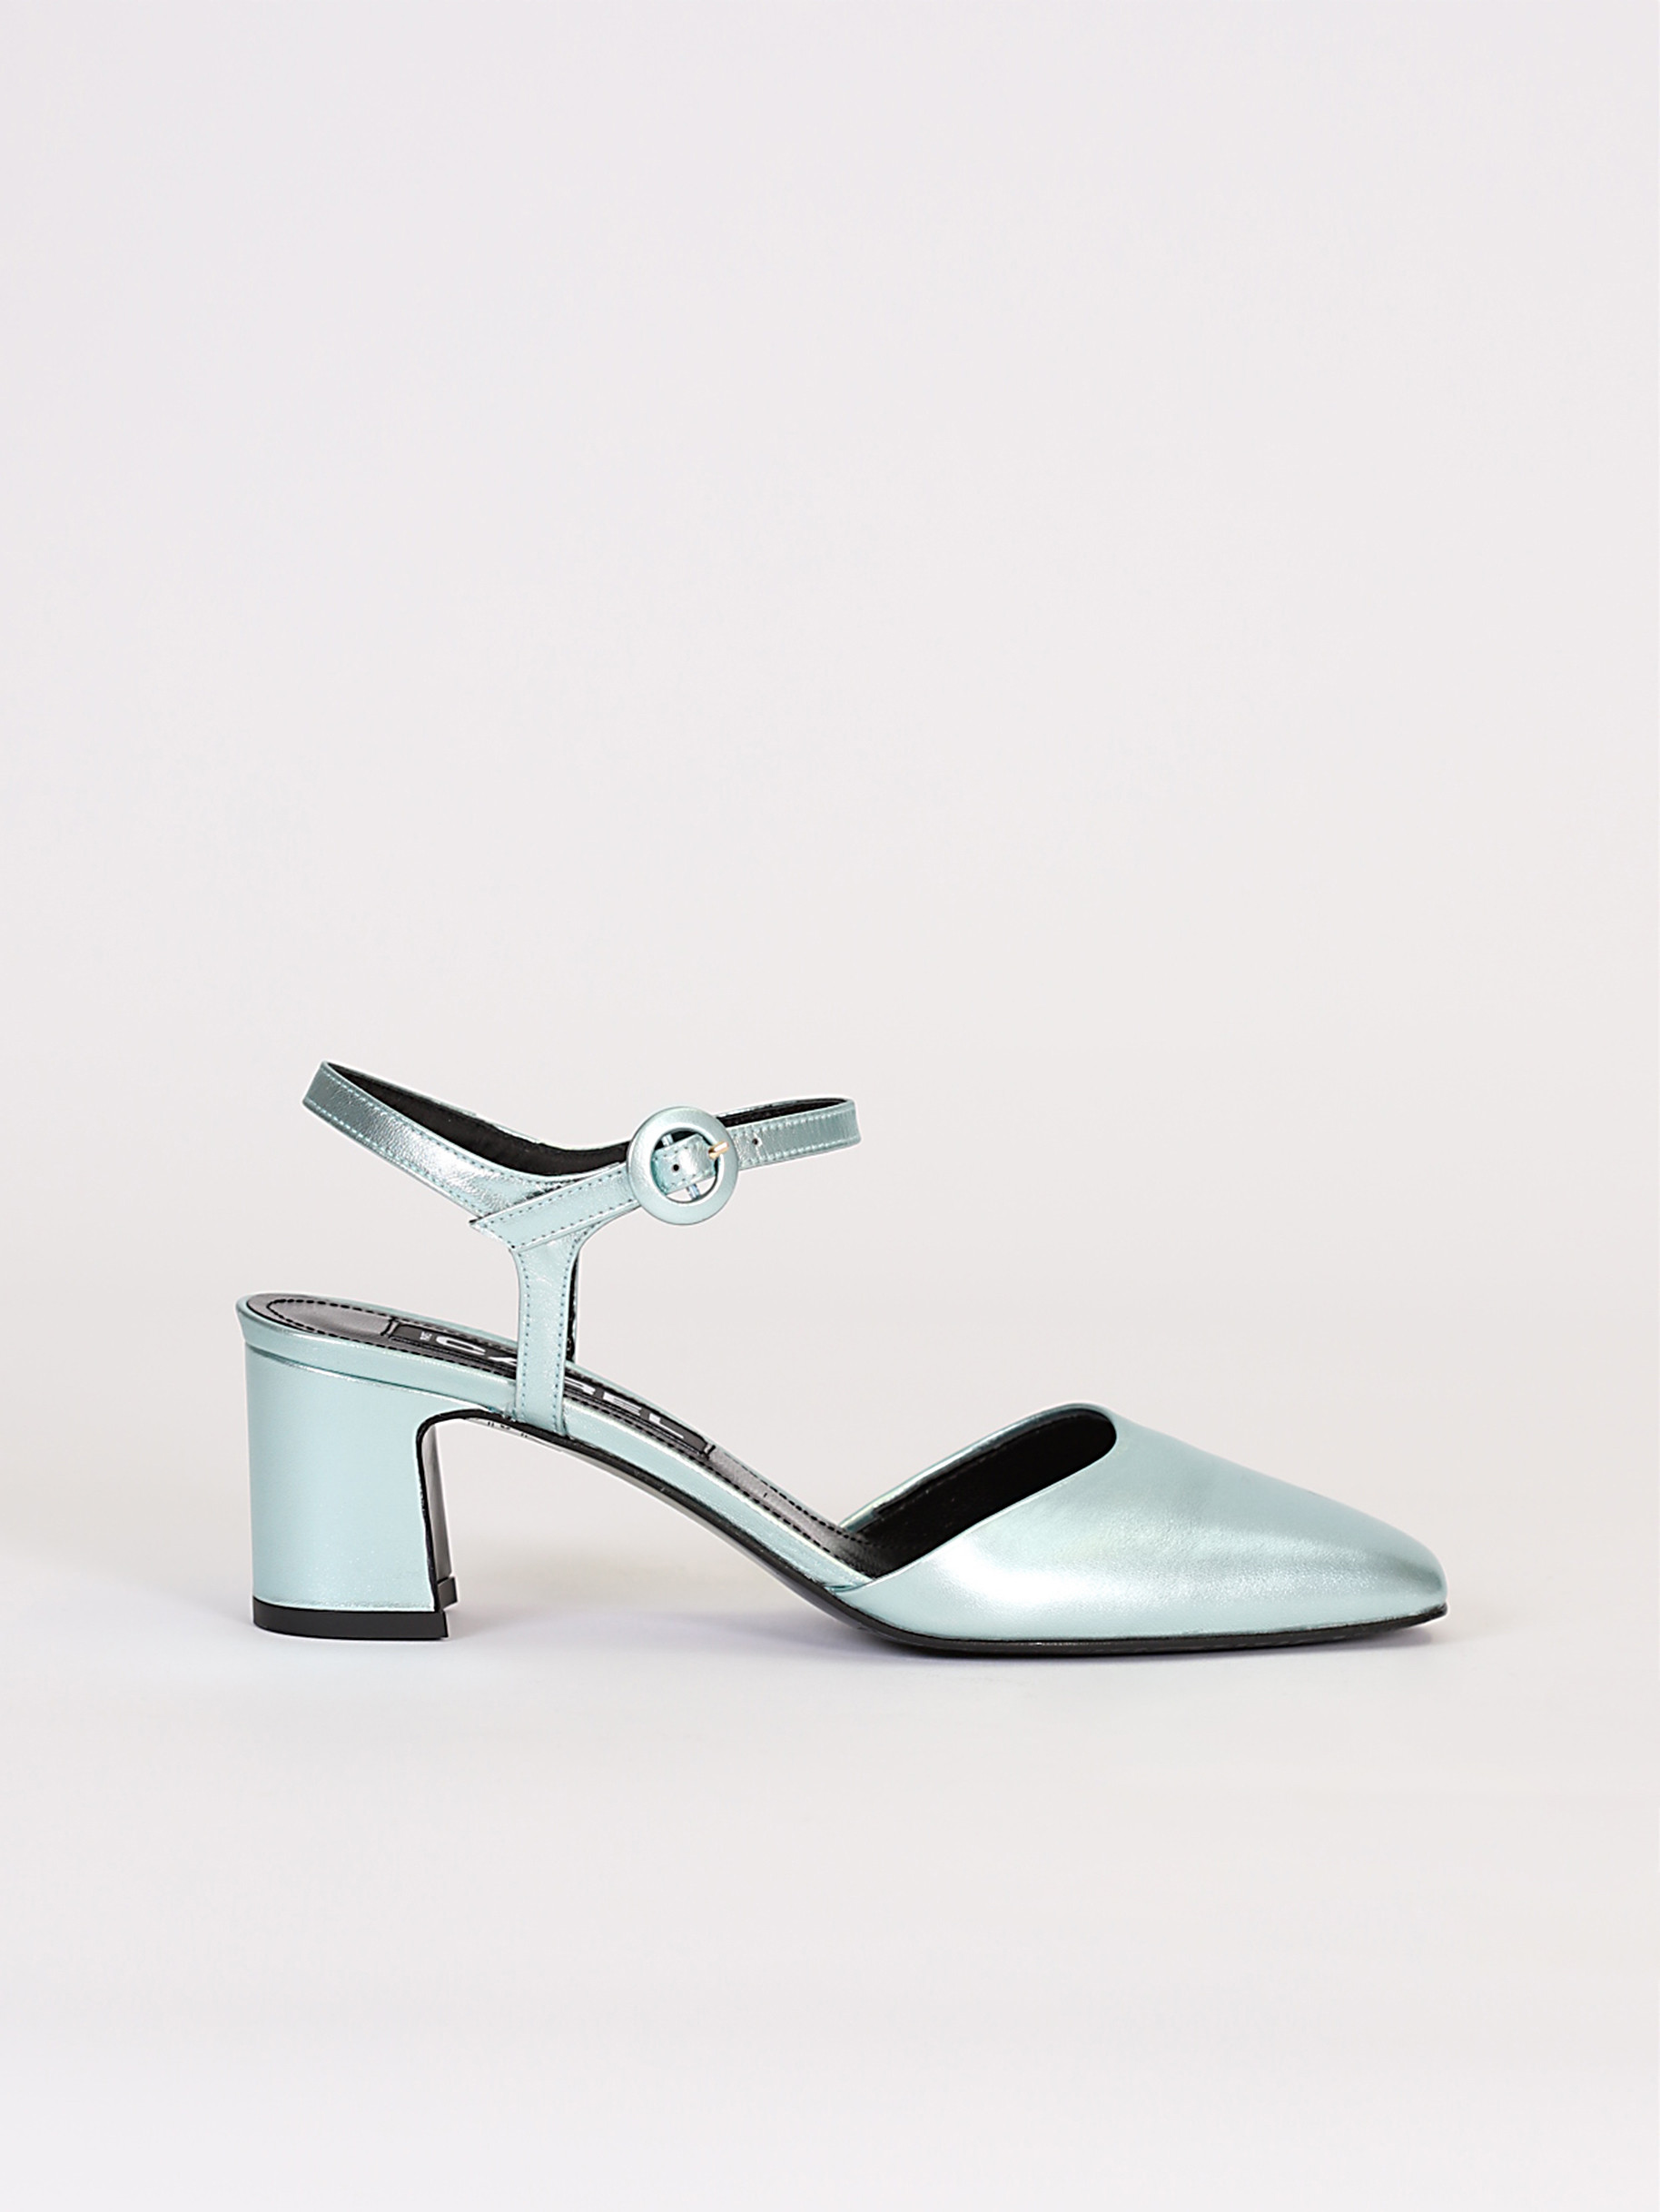 Sky blue laminated leather sandals